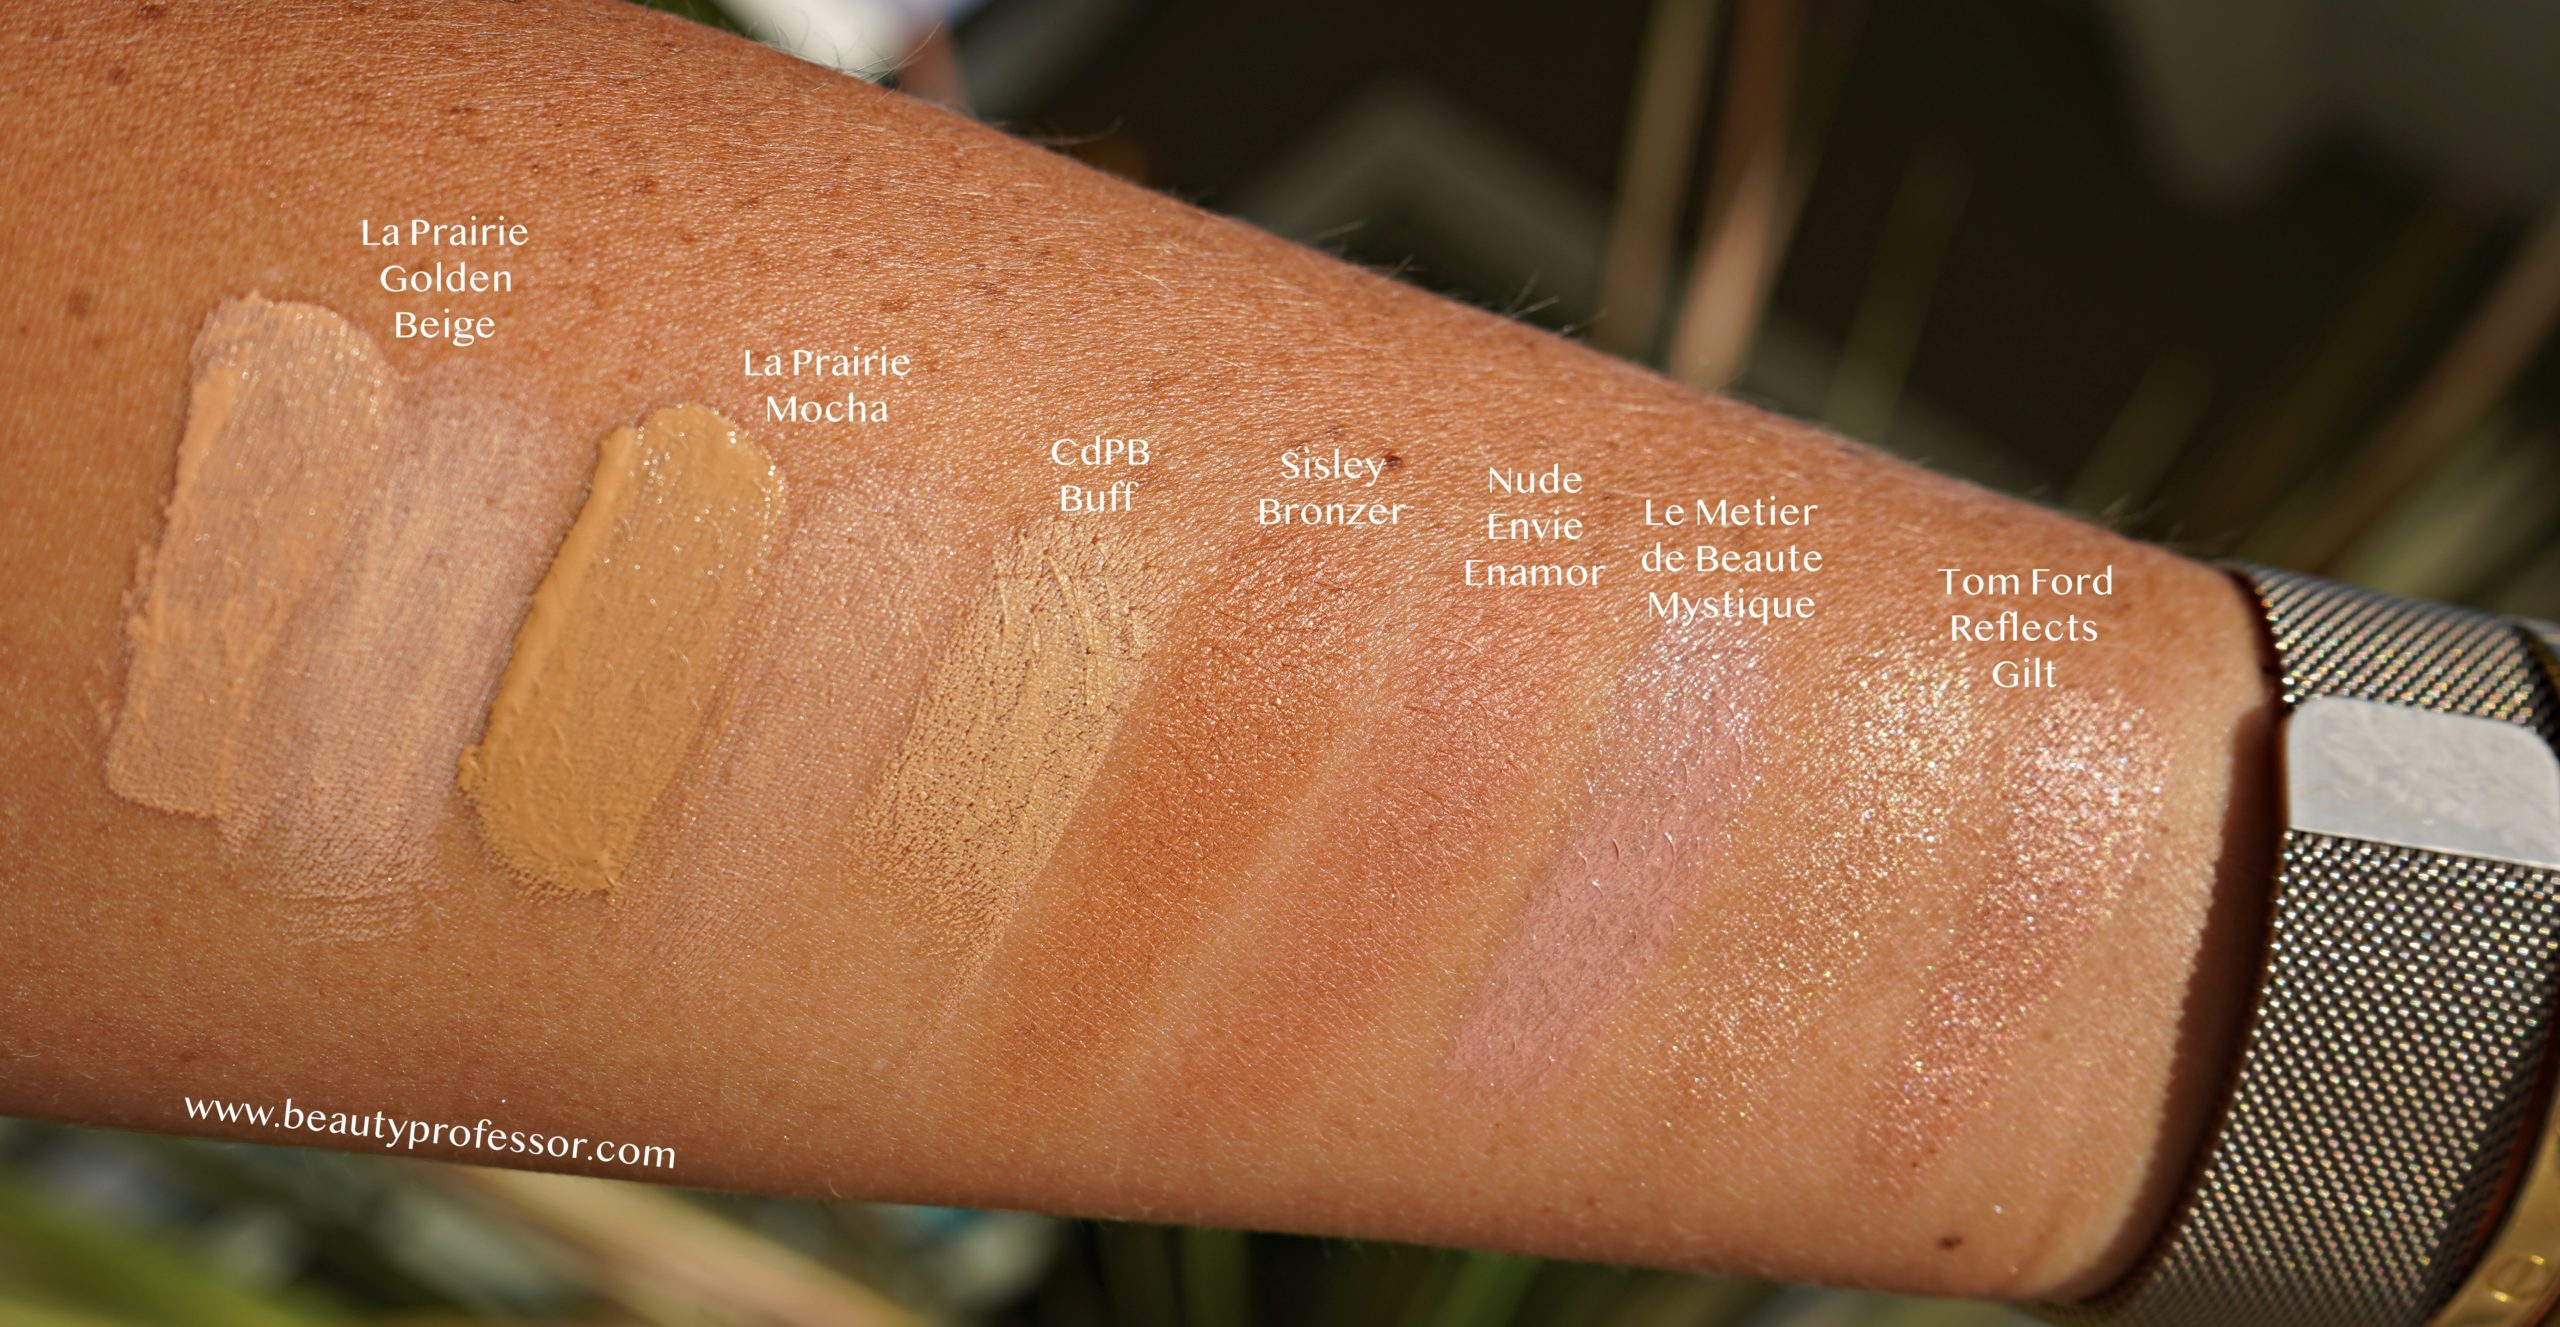 swatches of base and face makeup on an arm